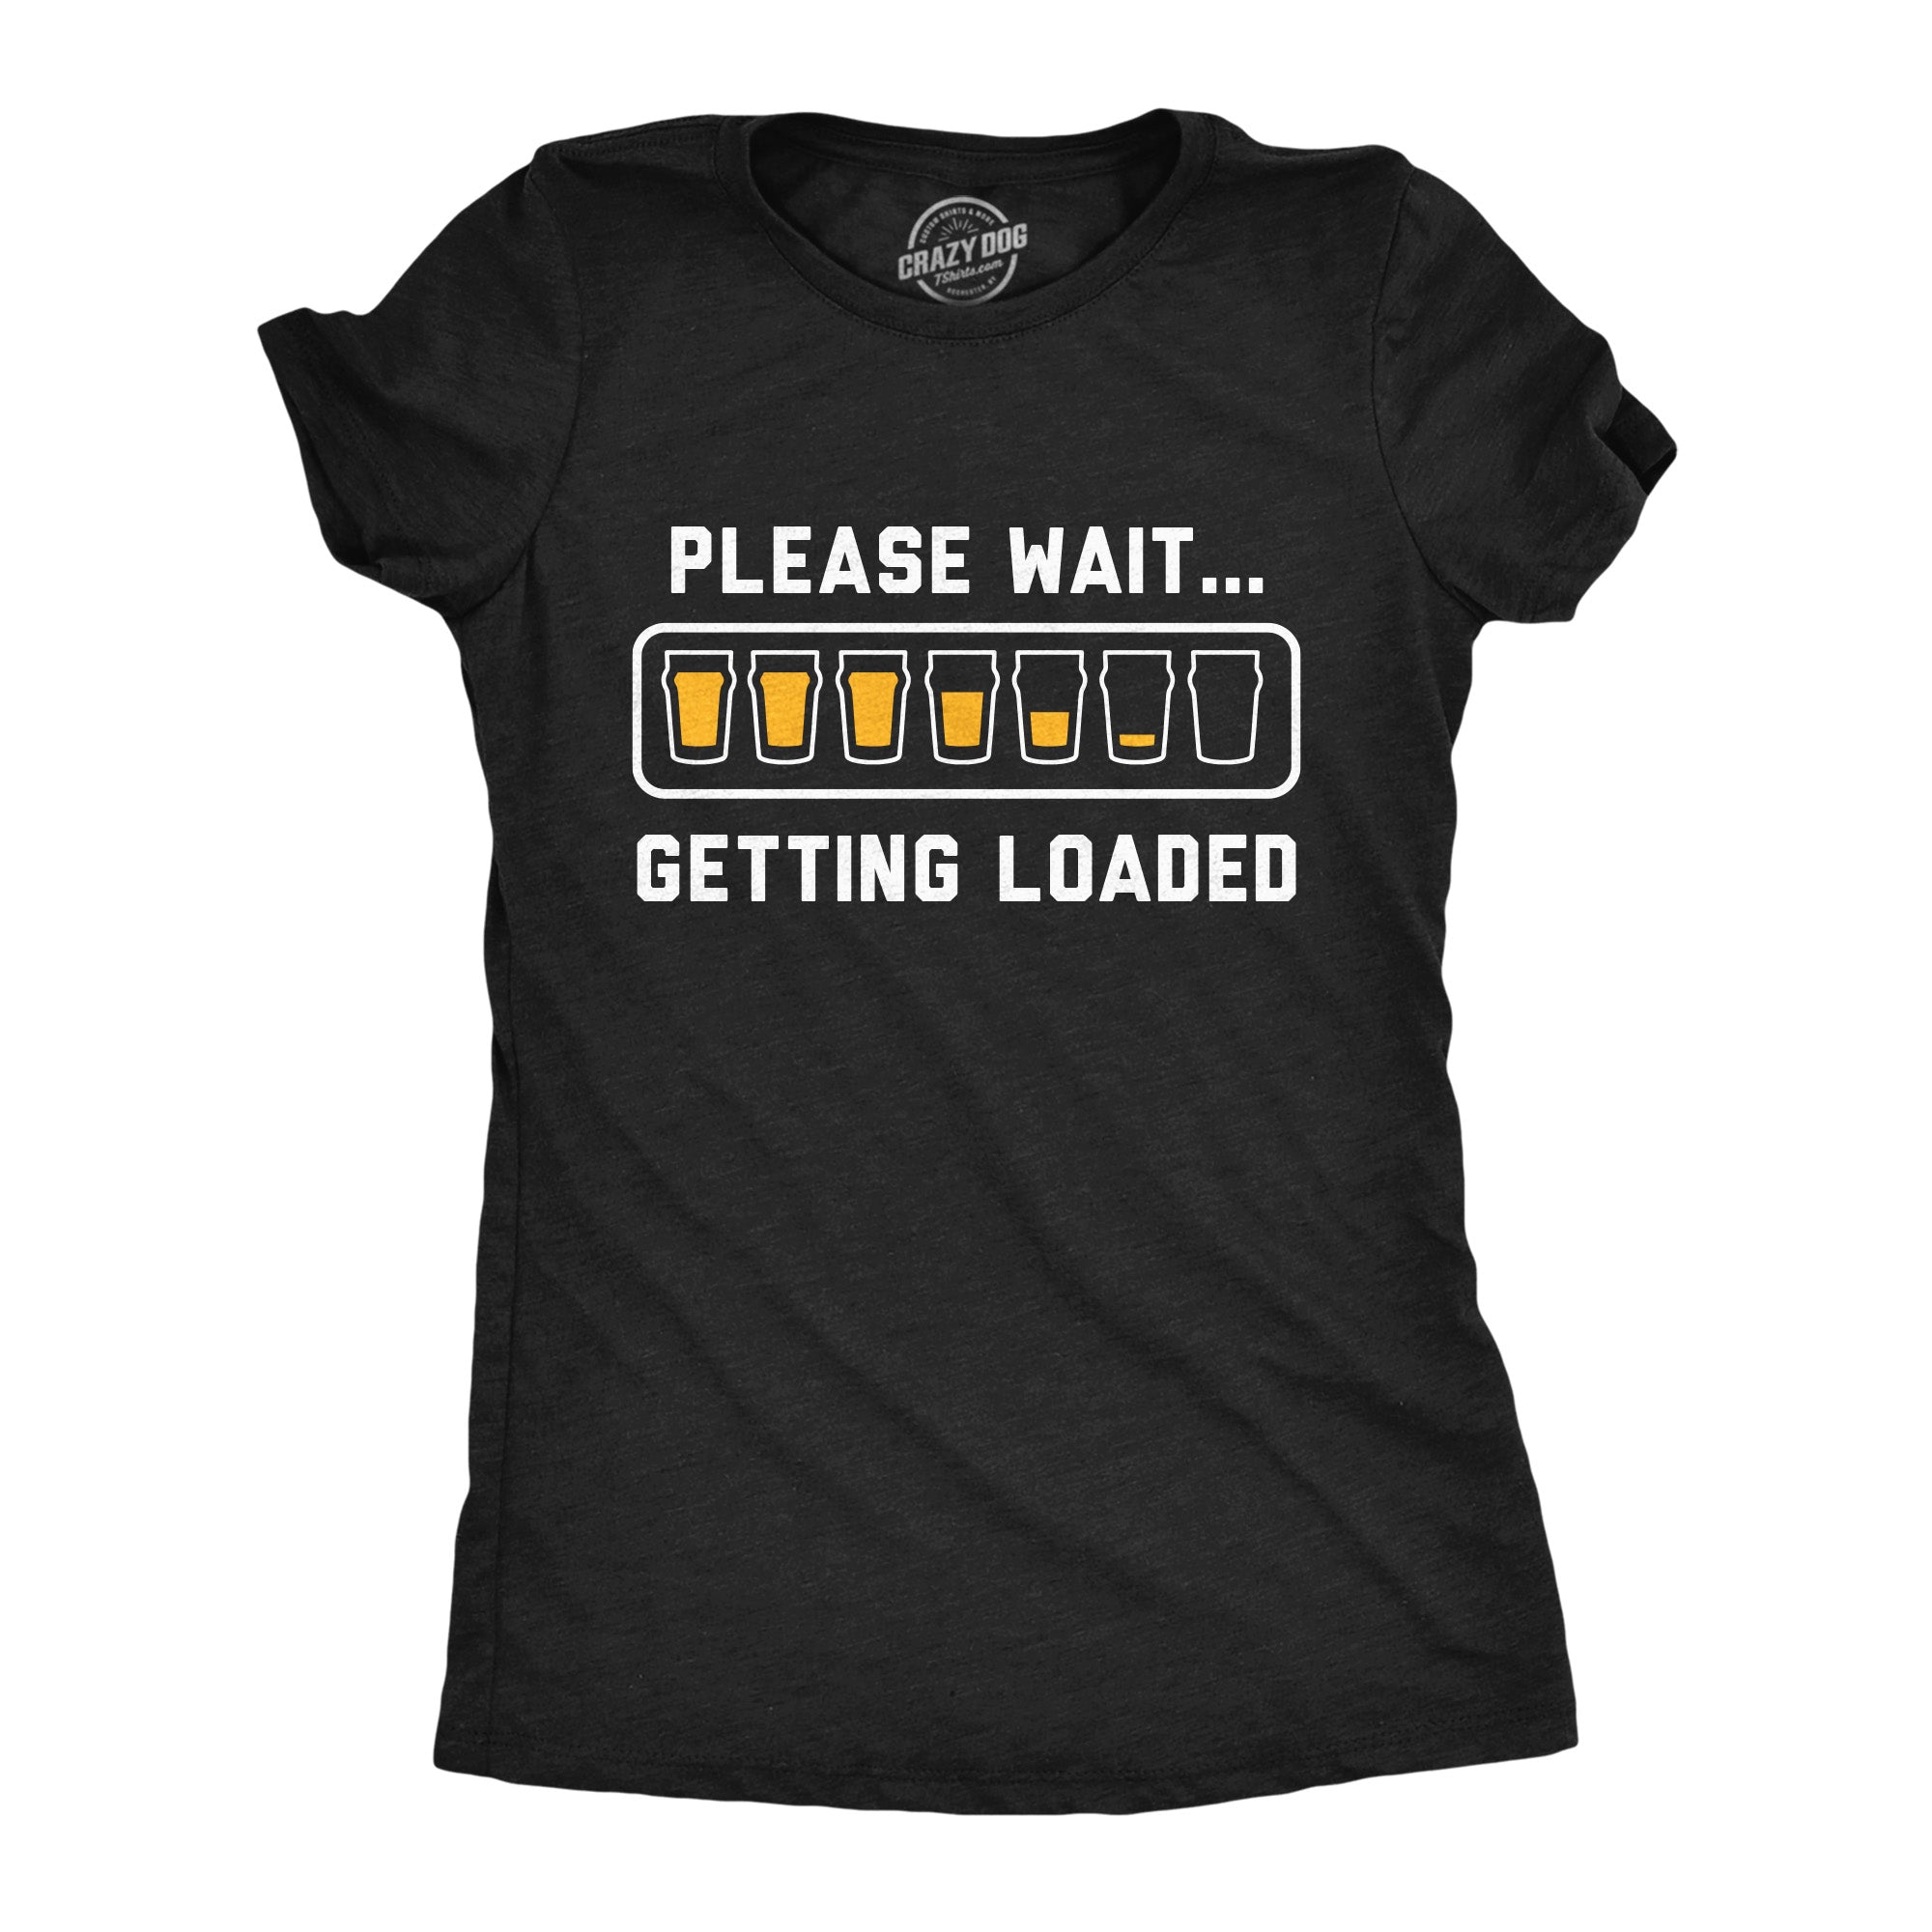 Funny Heather Black - Please Wait Getting Loaded Please Wait Getting Loaded Womens T Shirt Nerdy Drinking sarcastic Tee